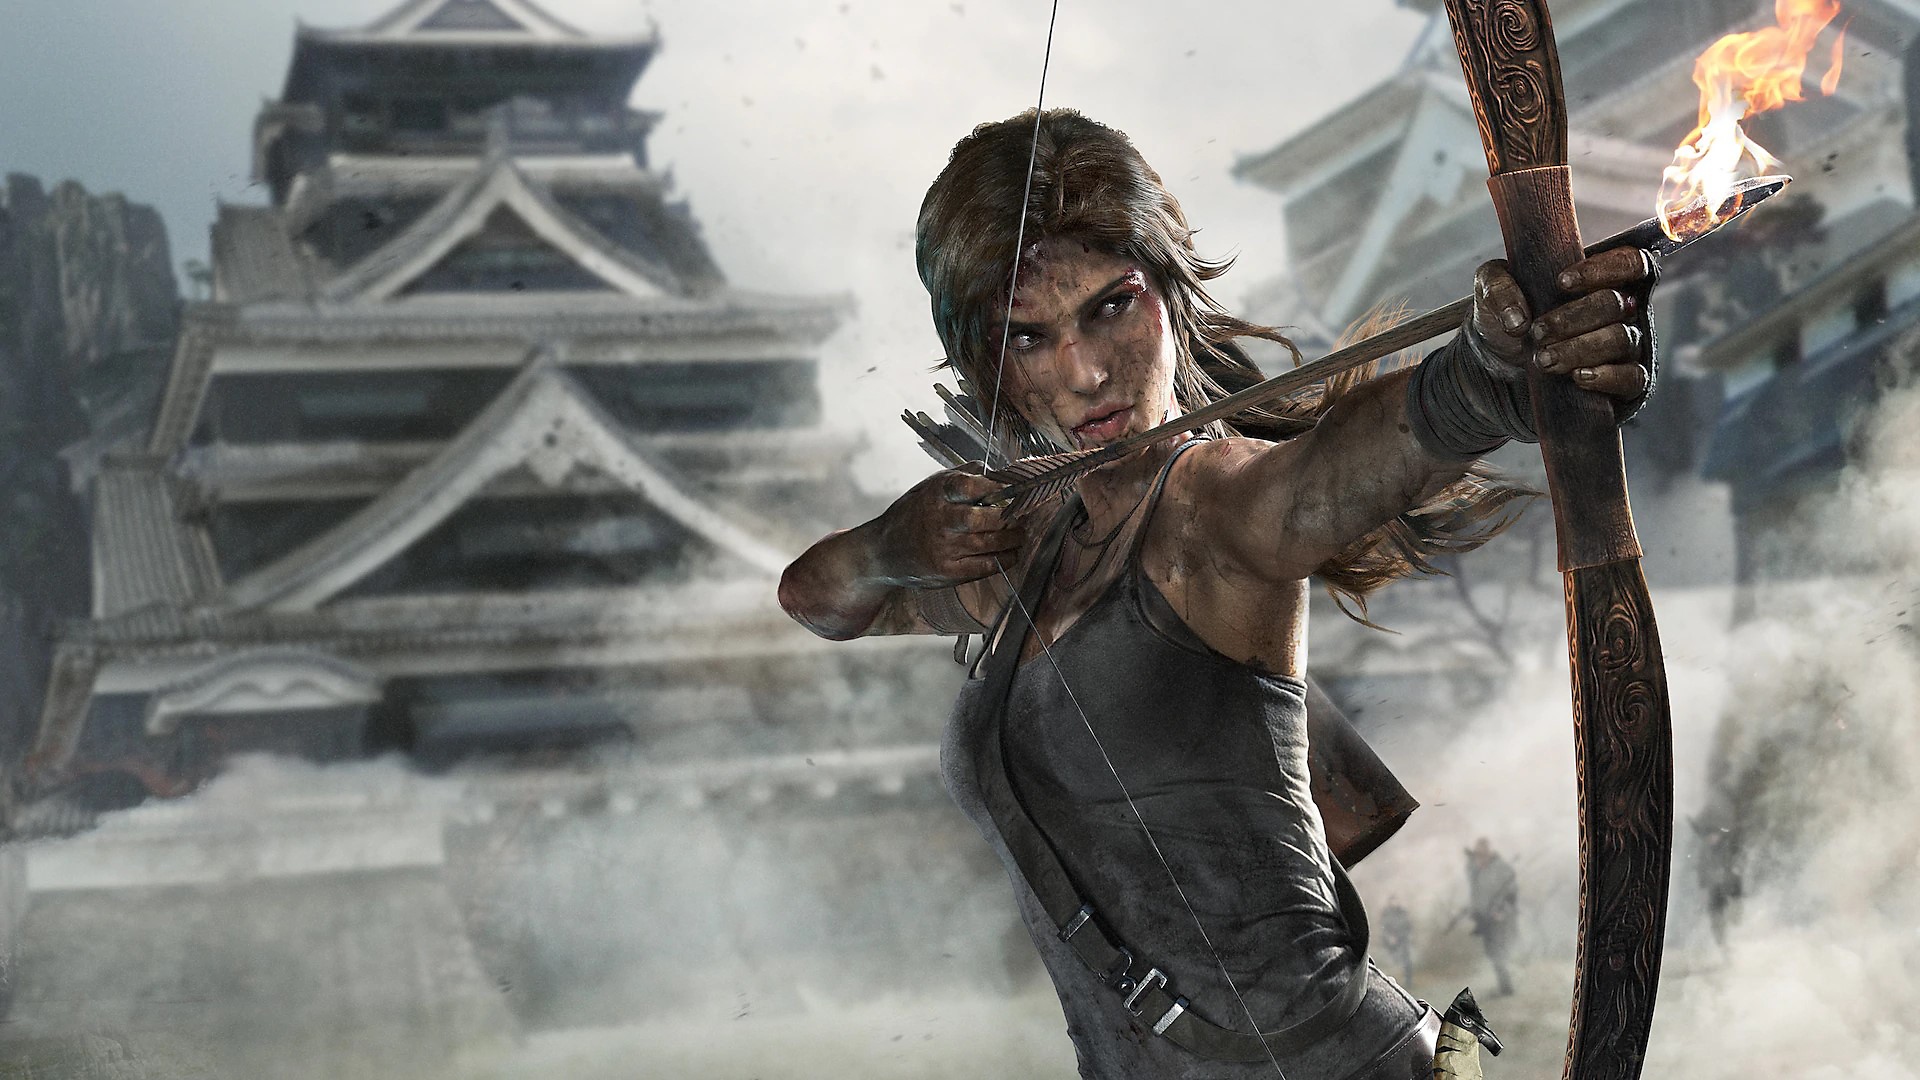 Tomb Raider Definitive Edition art showing Lara Croft pulling a bow and arrow